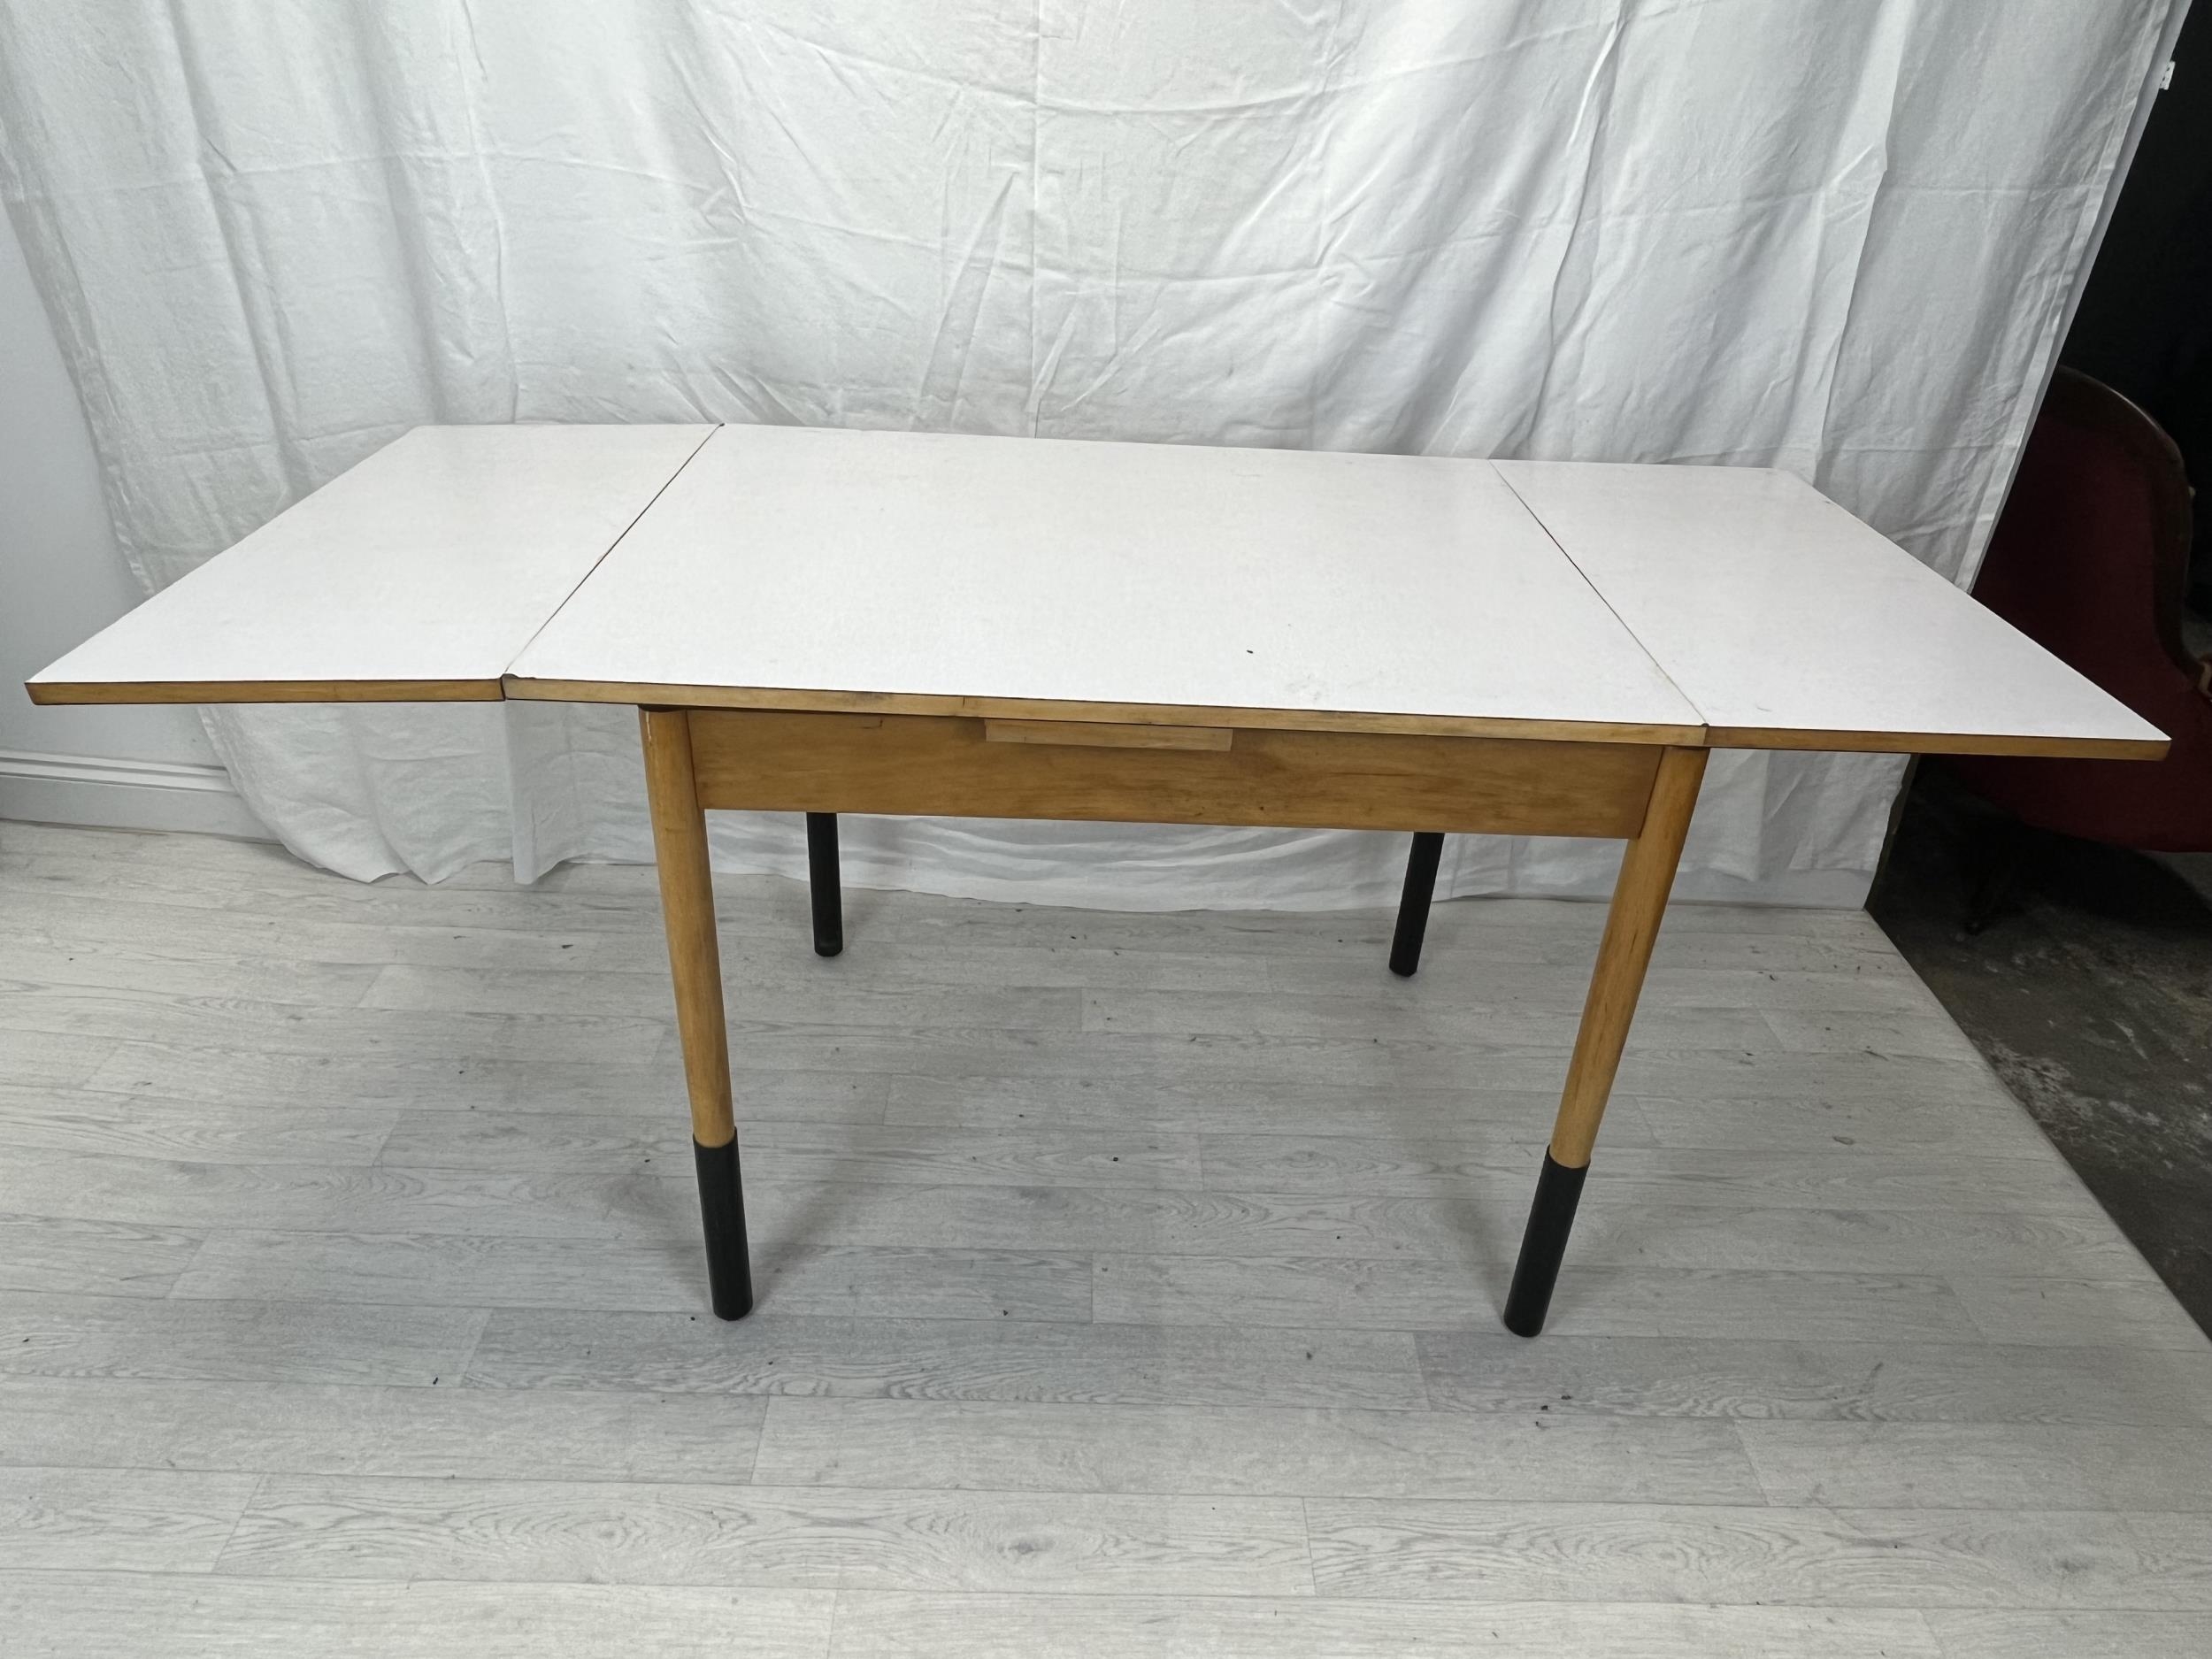 1960s kitchen dining table, mid century teak with Formica composite laminated top and draw leaf - Image 5 of 6